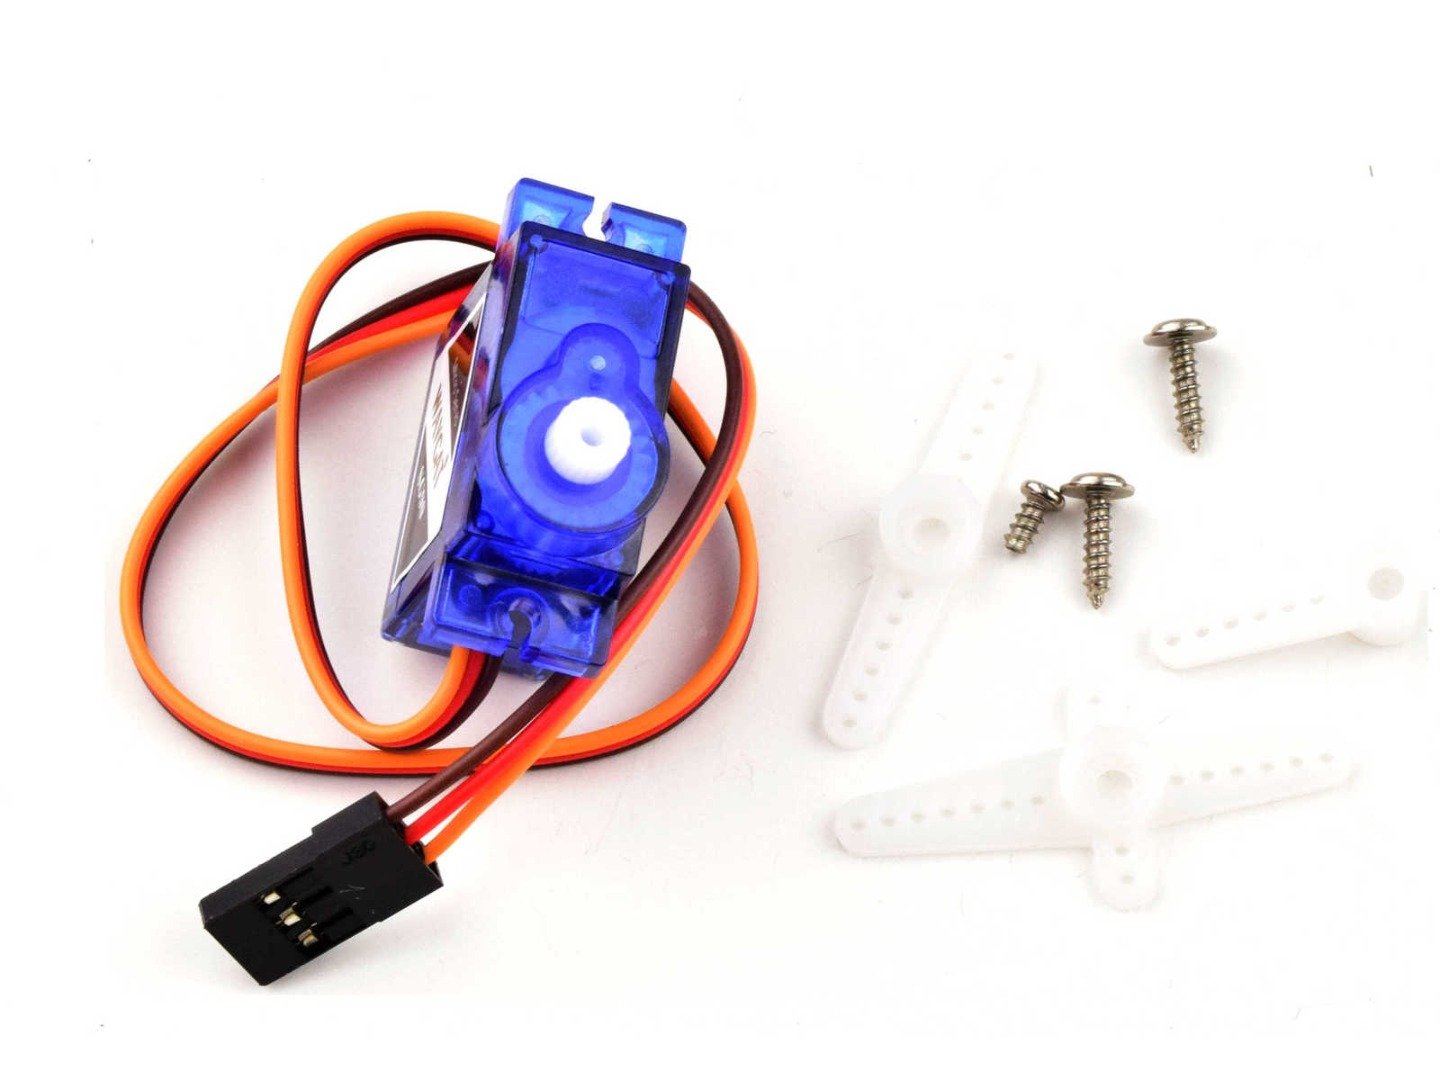 Micro RC Servo SG90 4.8-6V for helicopters cars planes 7